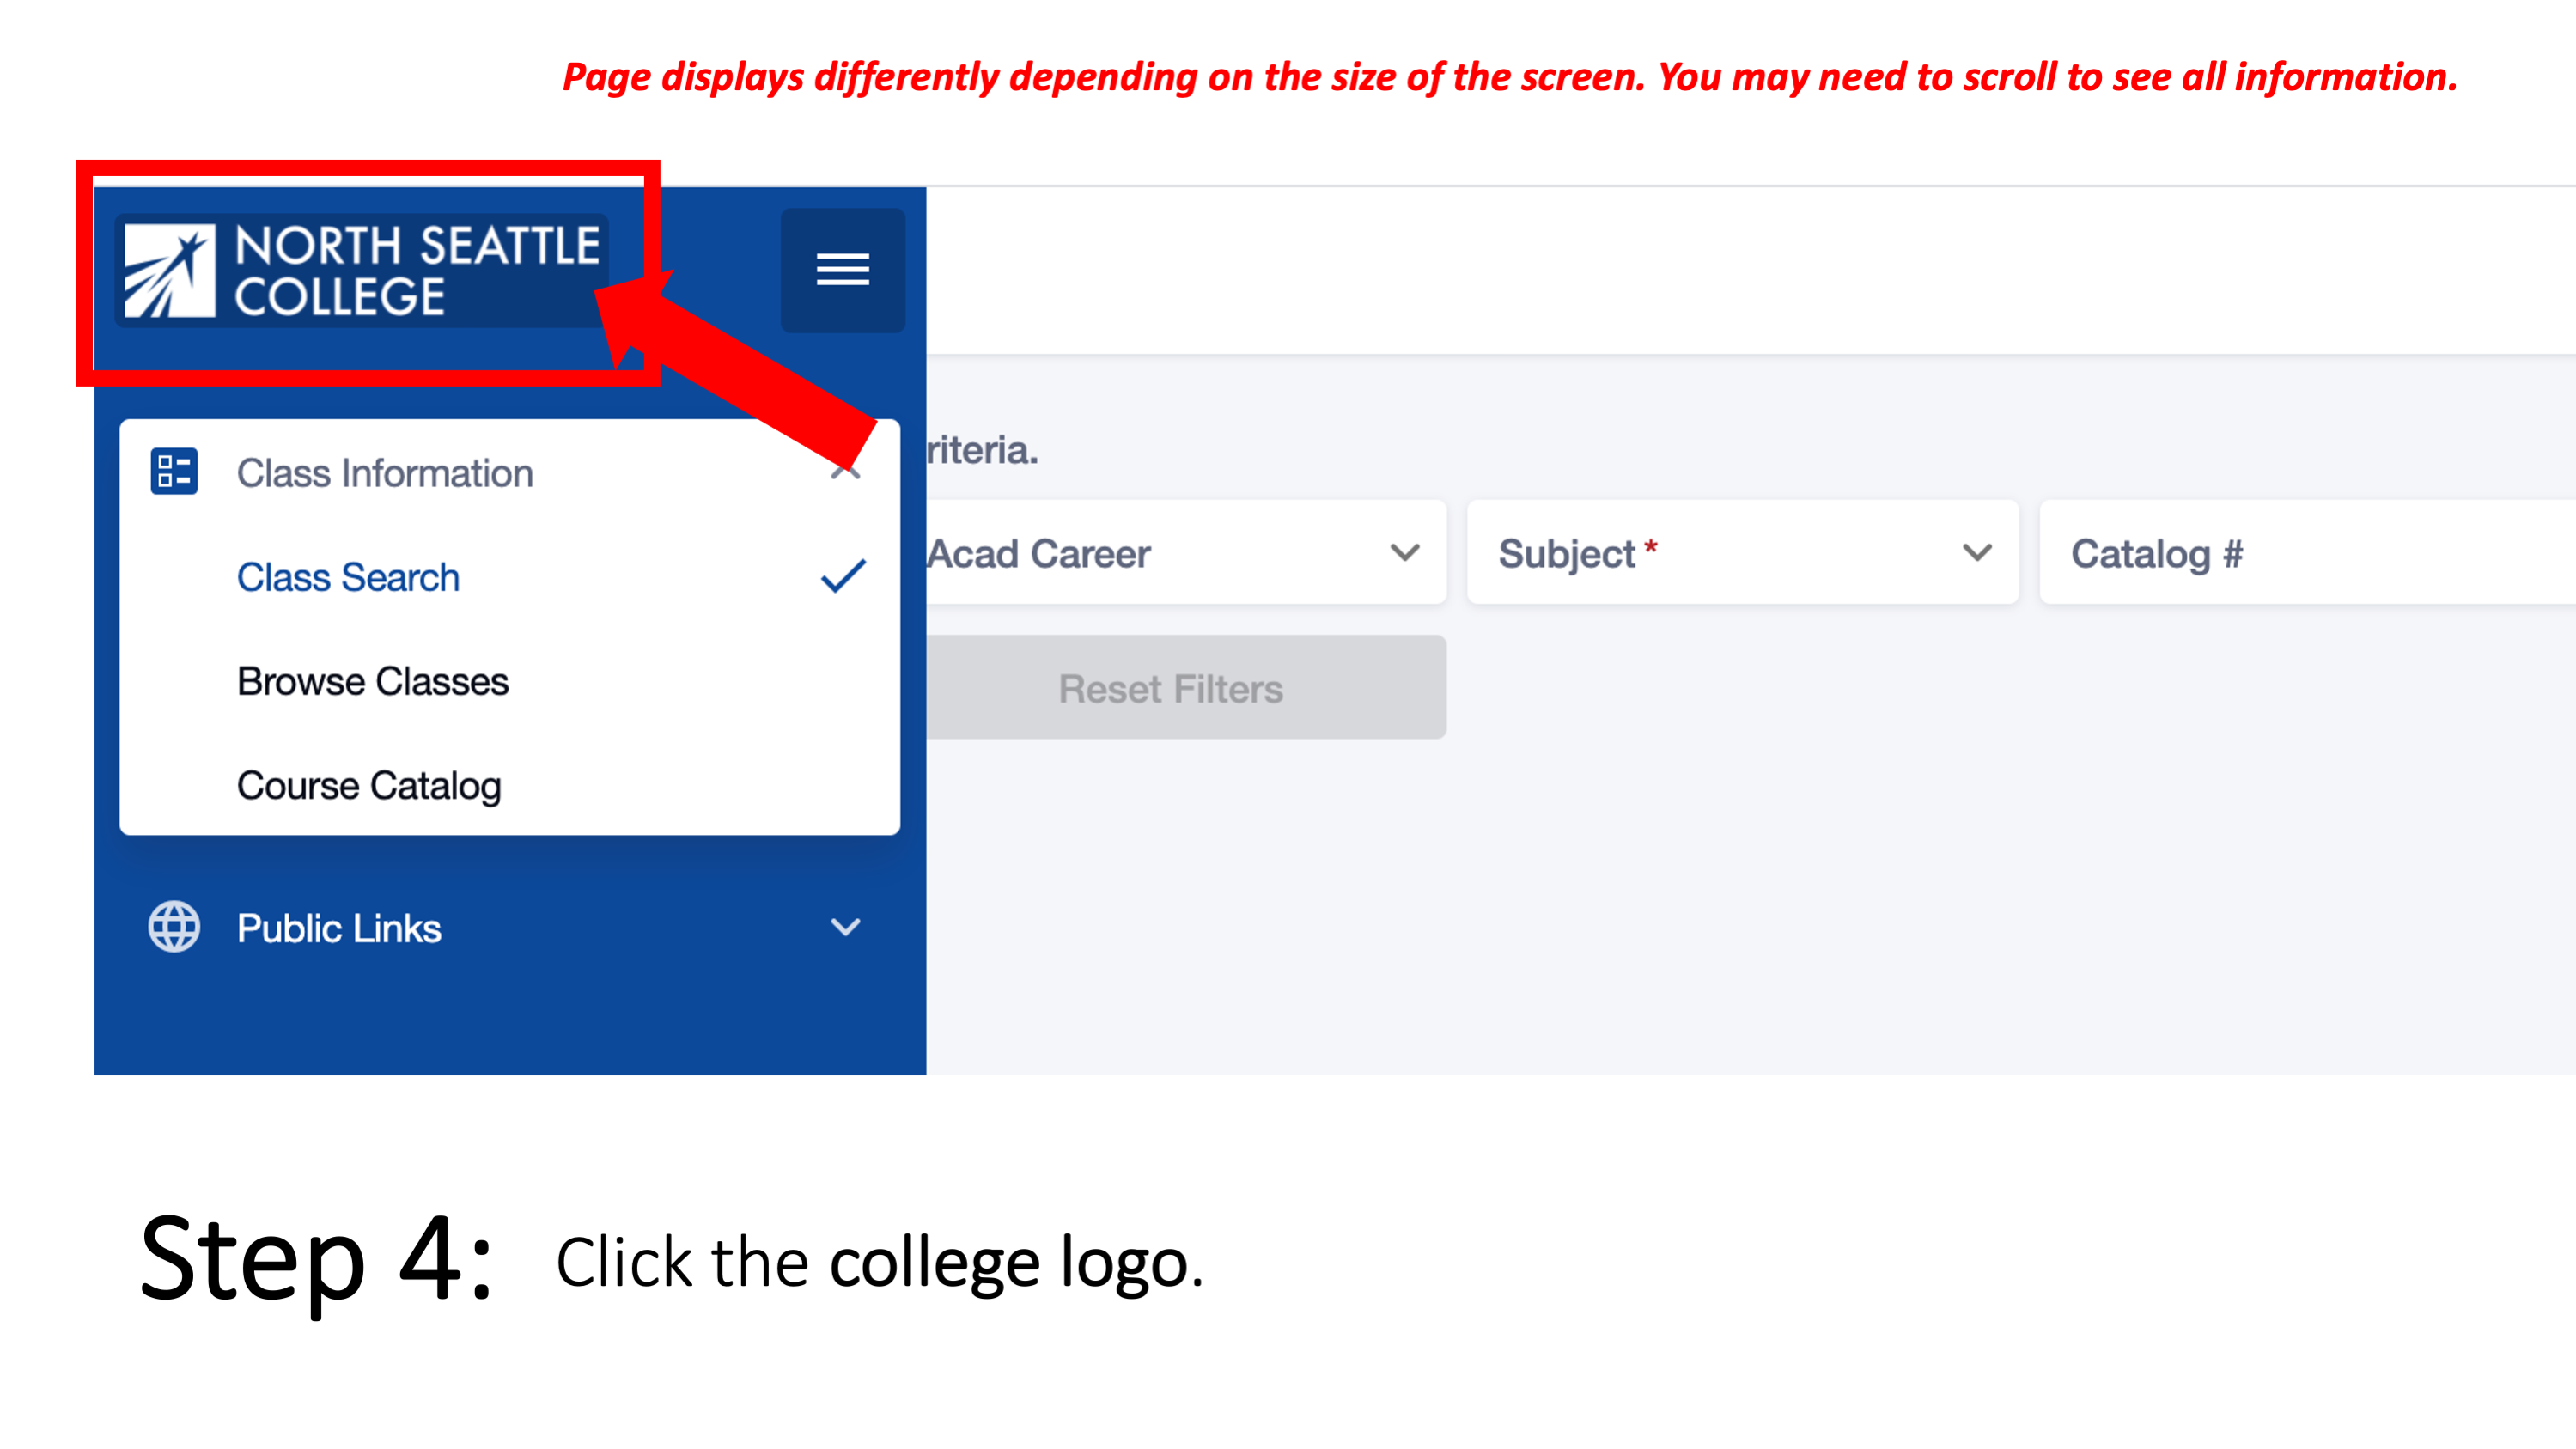 Step 4: Click the college logo. Page displays differently depending on the size of the screen. You may need to scroll to see all information.